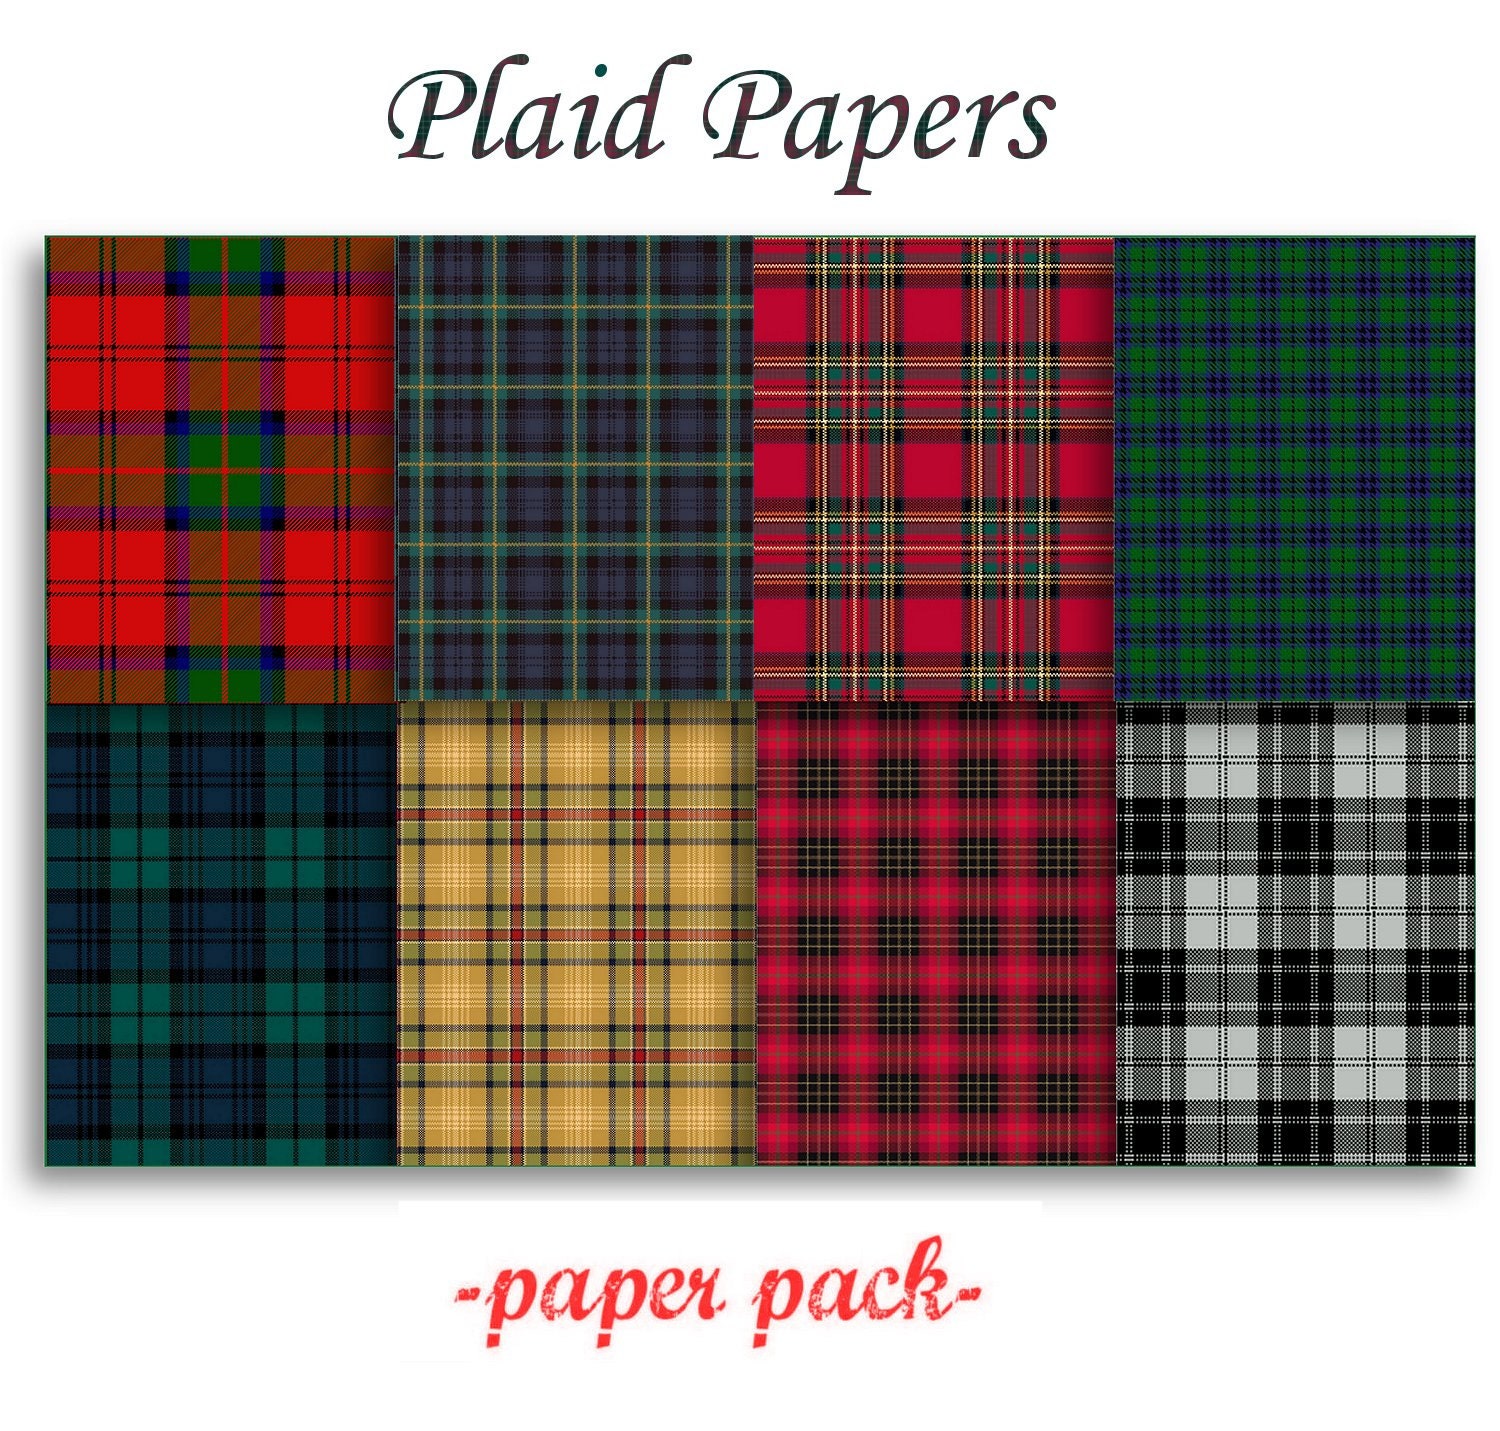 Classic Blue Tartain Plaid Style #1 Double Sided Paper Cardstock